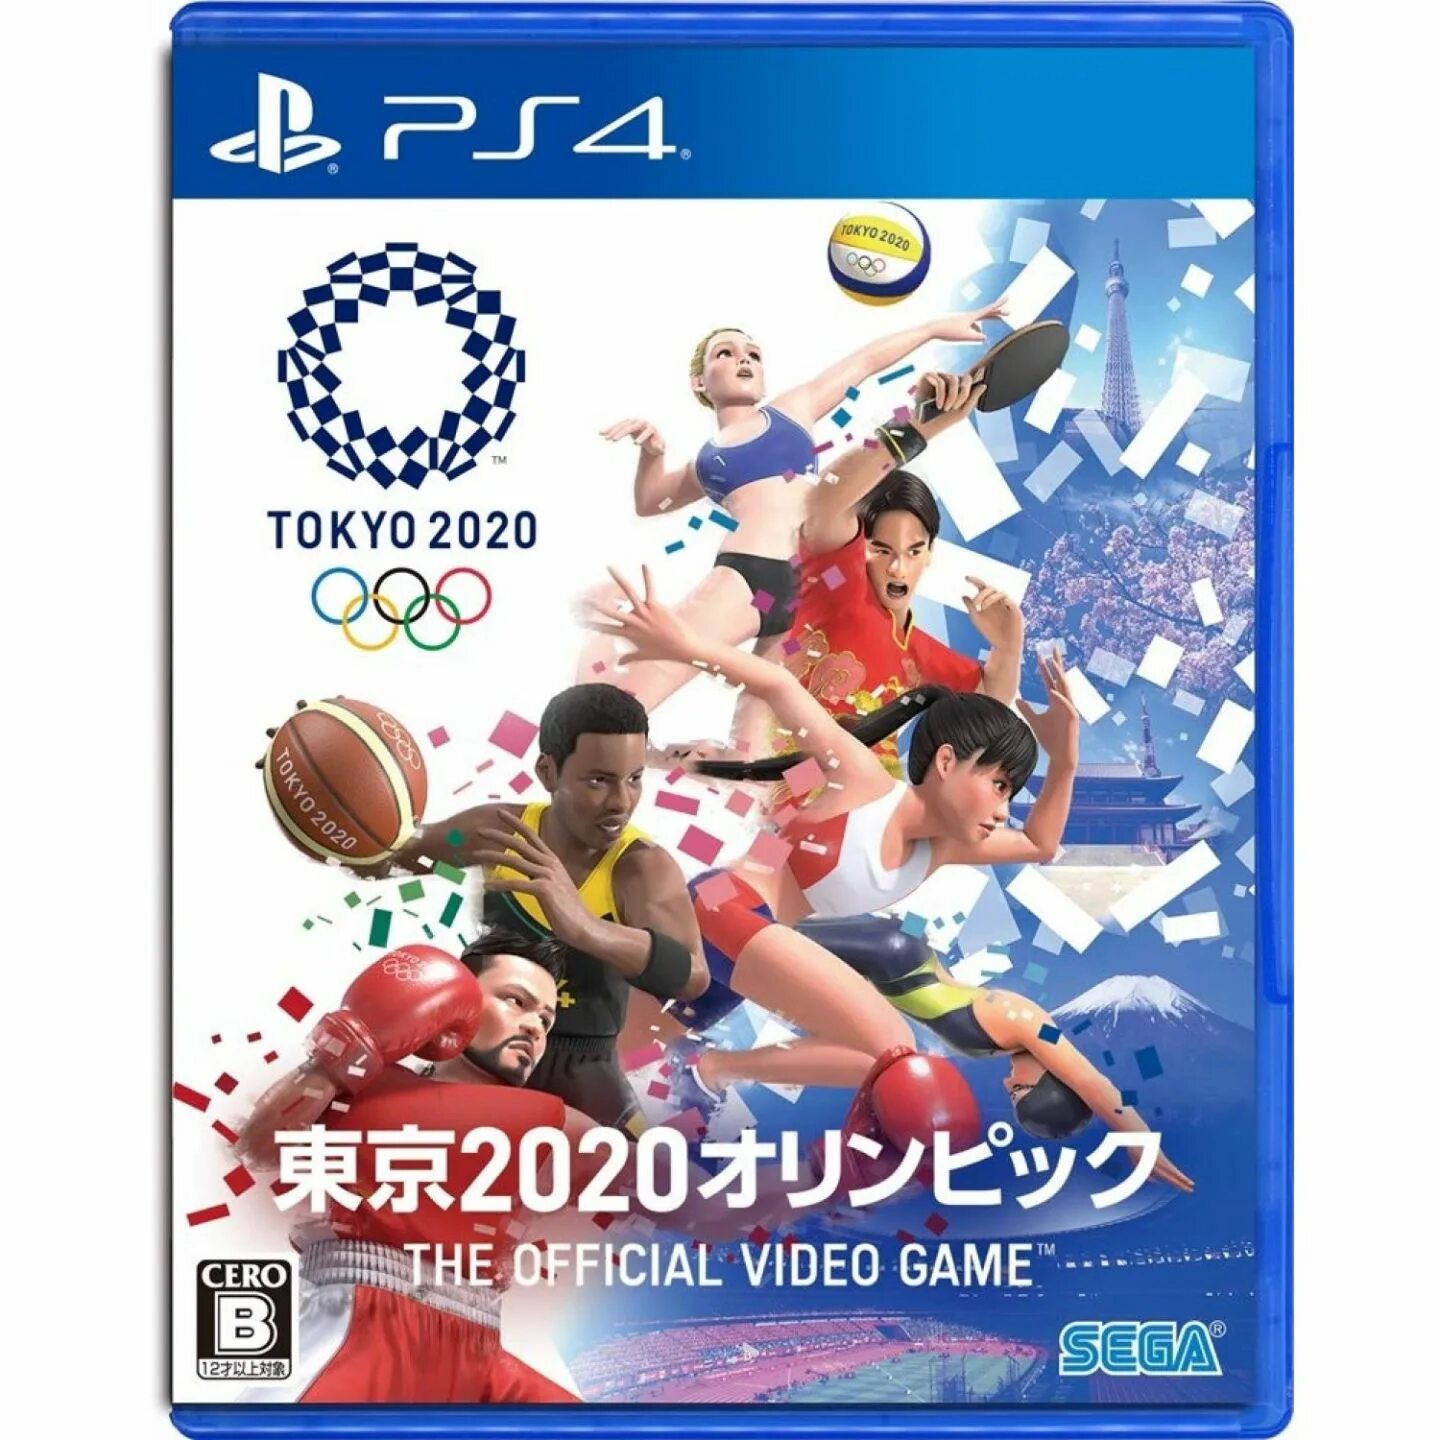 Tokyo 2020 game. Олимпийские игры игра Токио. Ps4 Олимпийские игры. Olympic games Tokyo 2020 - the Official Video game. Olympic games Tokyo 2020 – the Official Video game Xbox one.